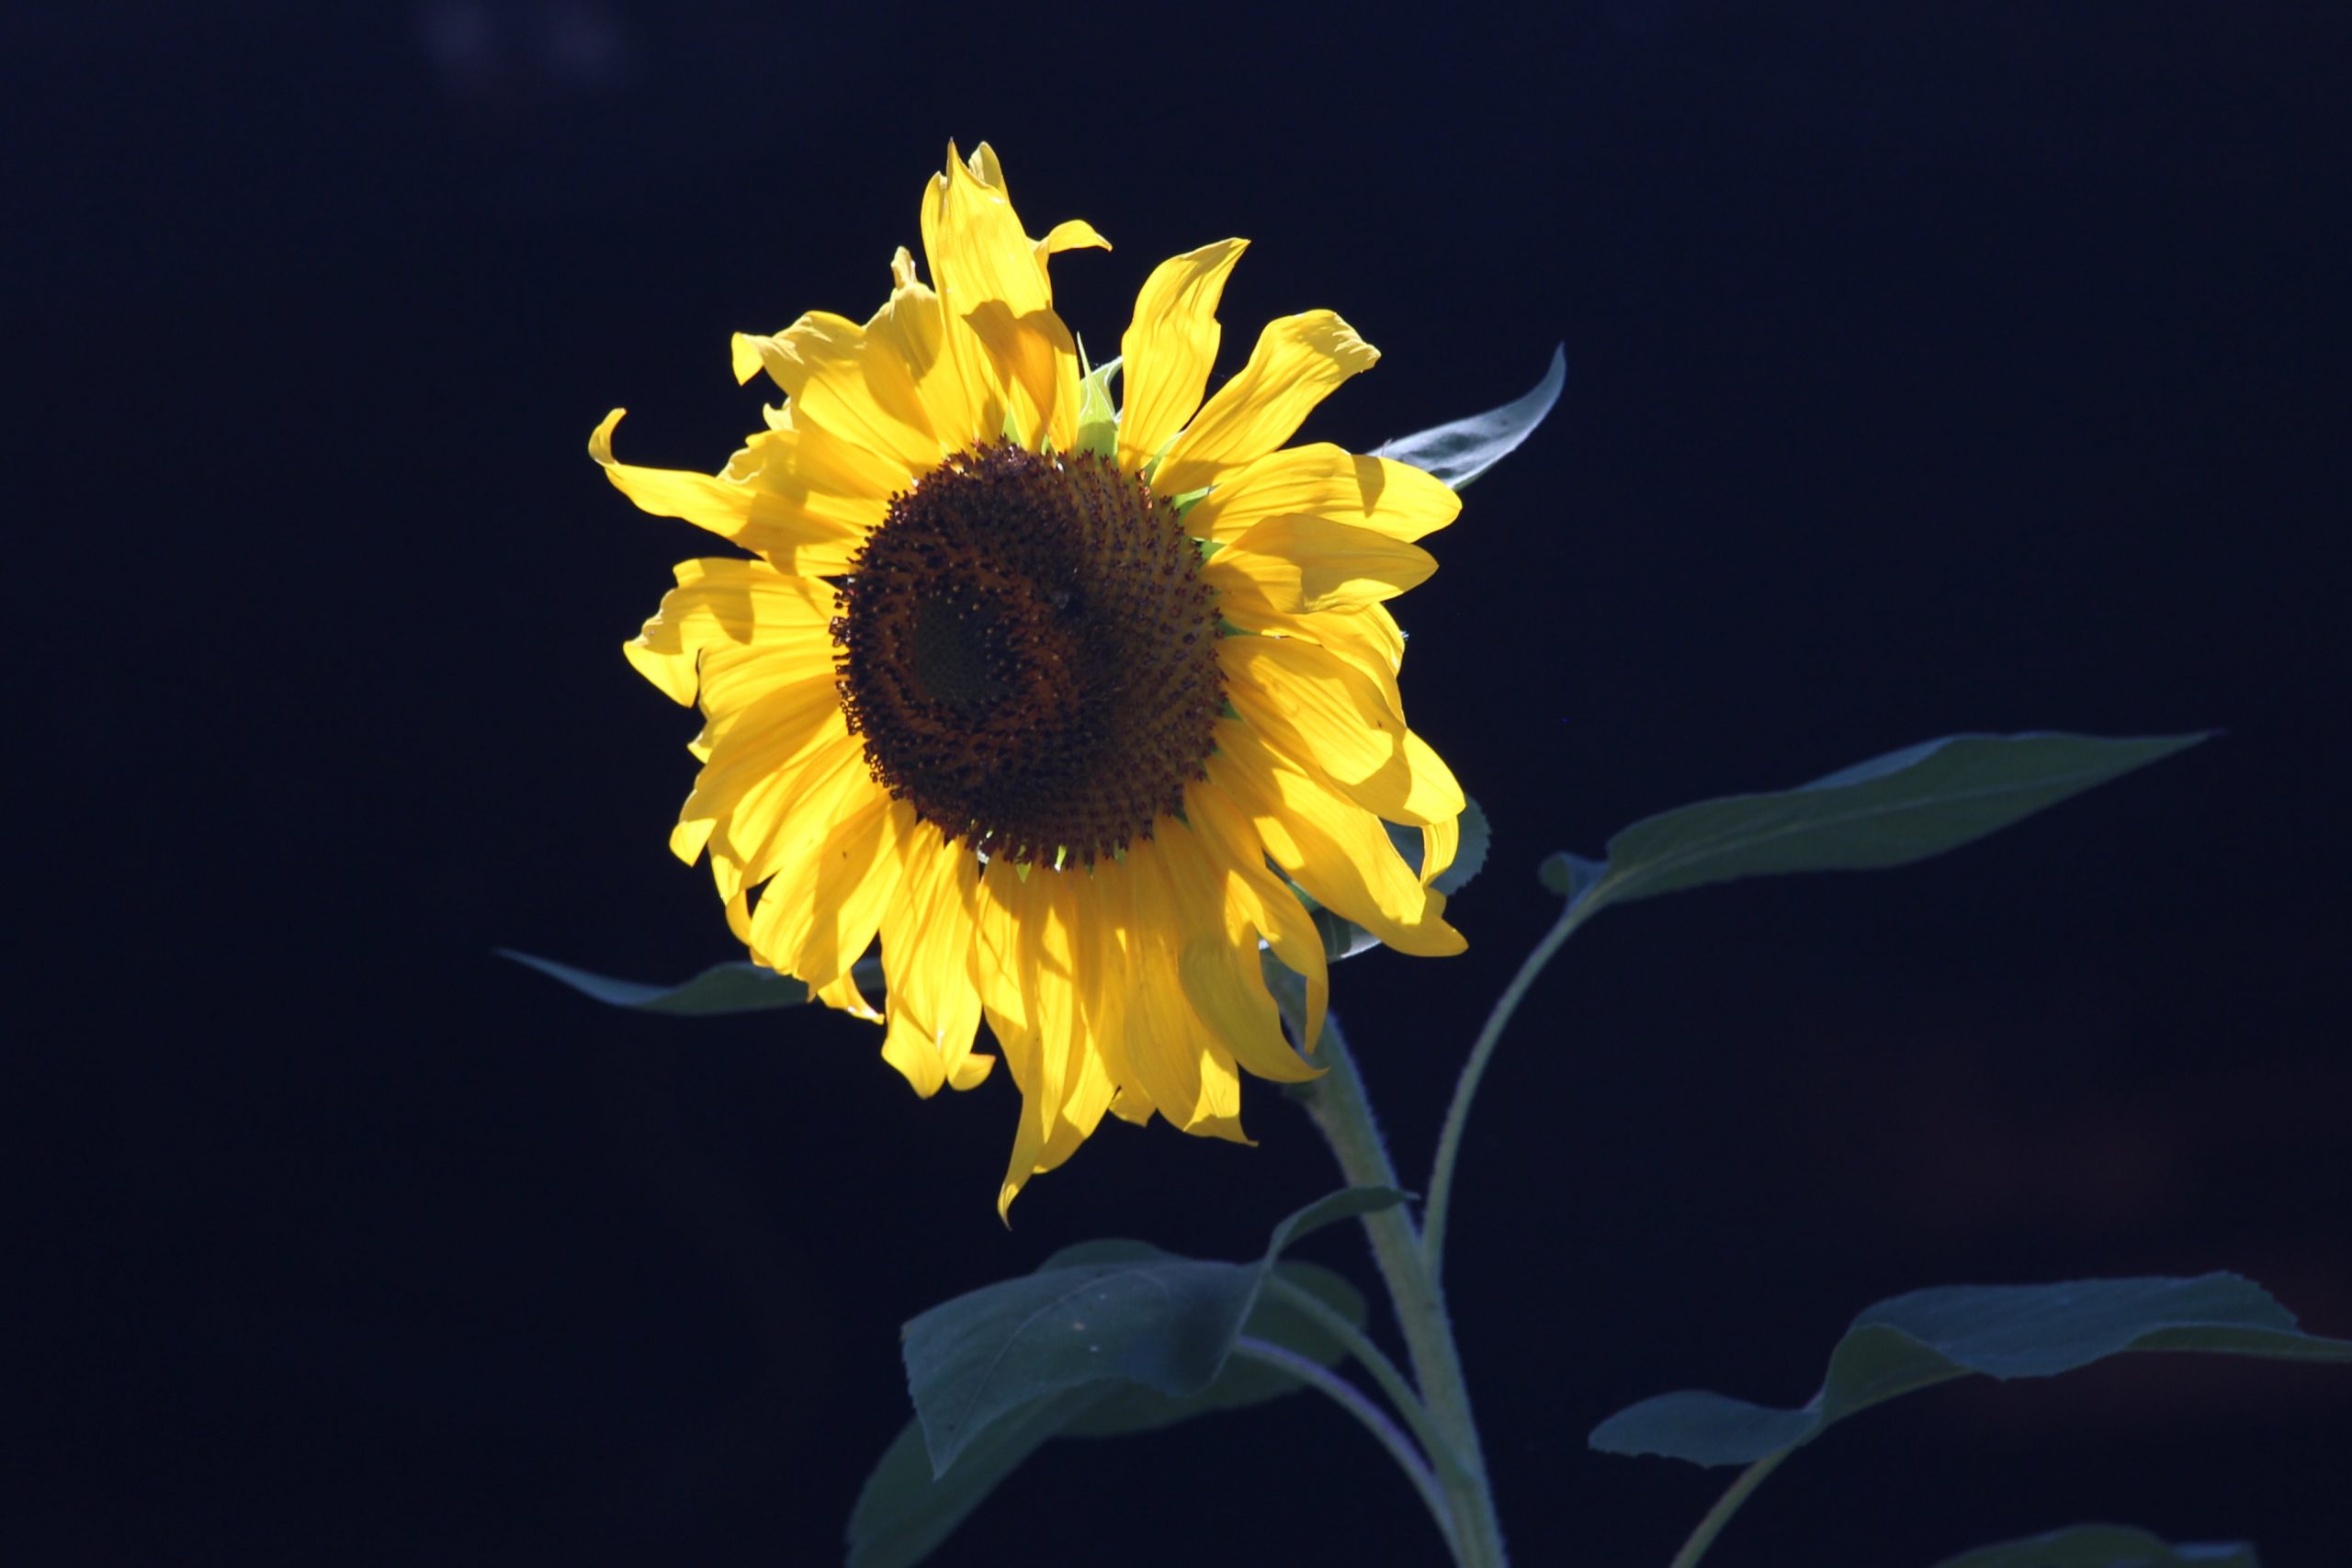 A single sunflower with vibrant yellow petals and a dark brown center is shown against a dark background. Pictures reveal green leaves and part of the stem in the foreground.